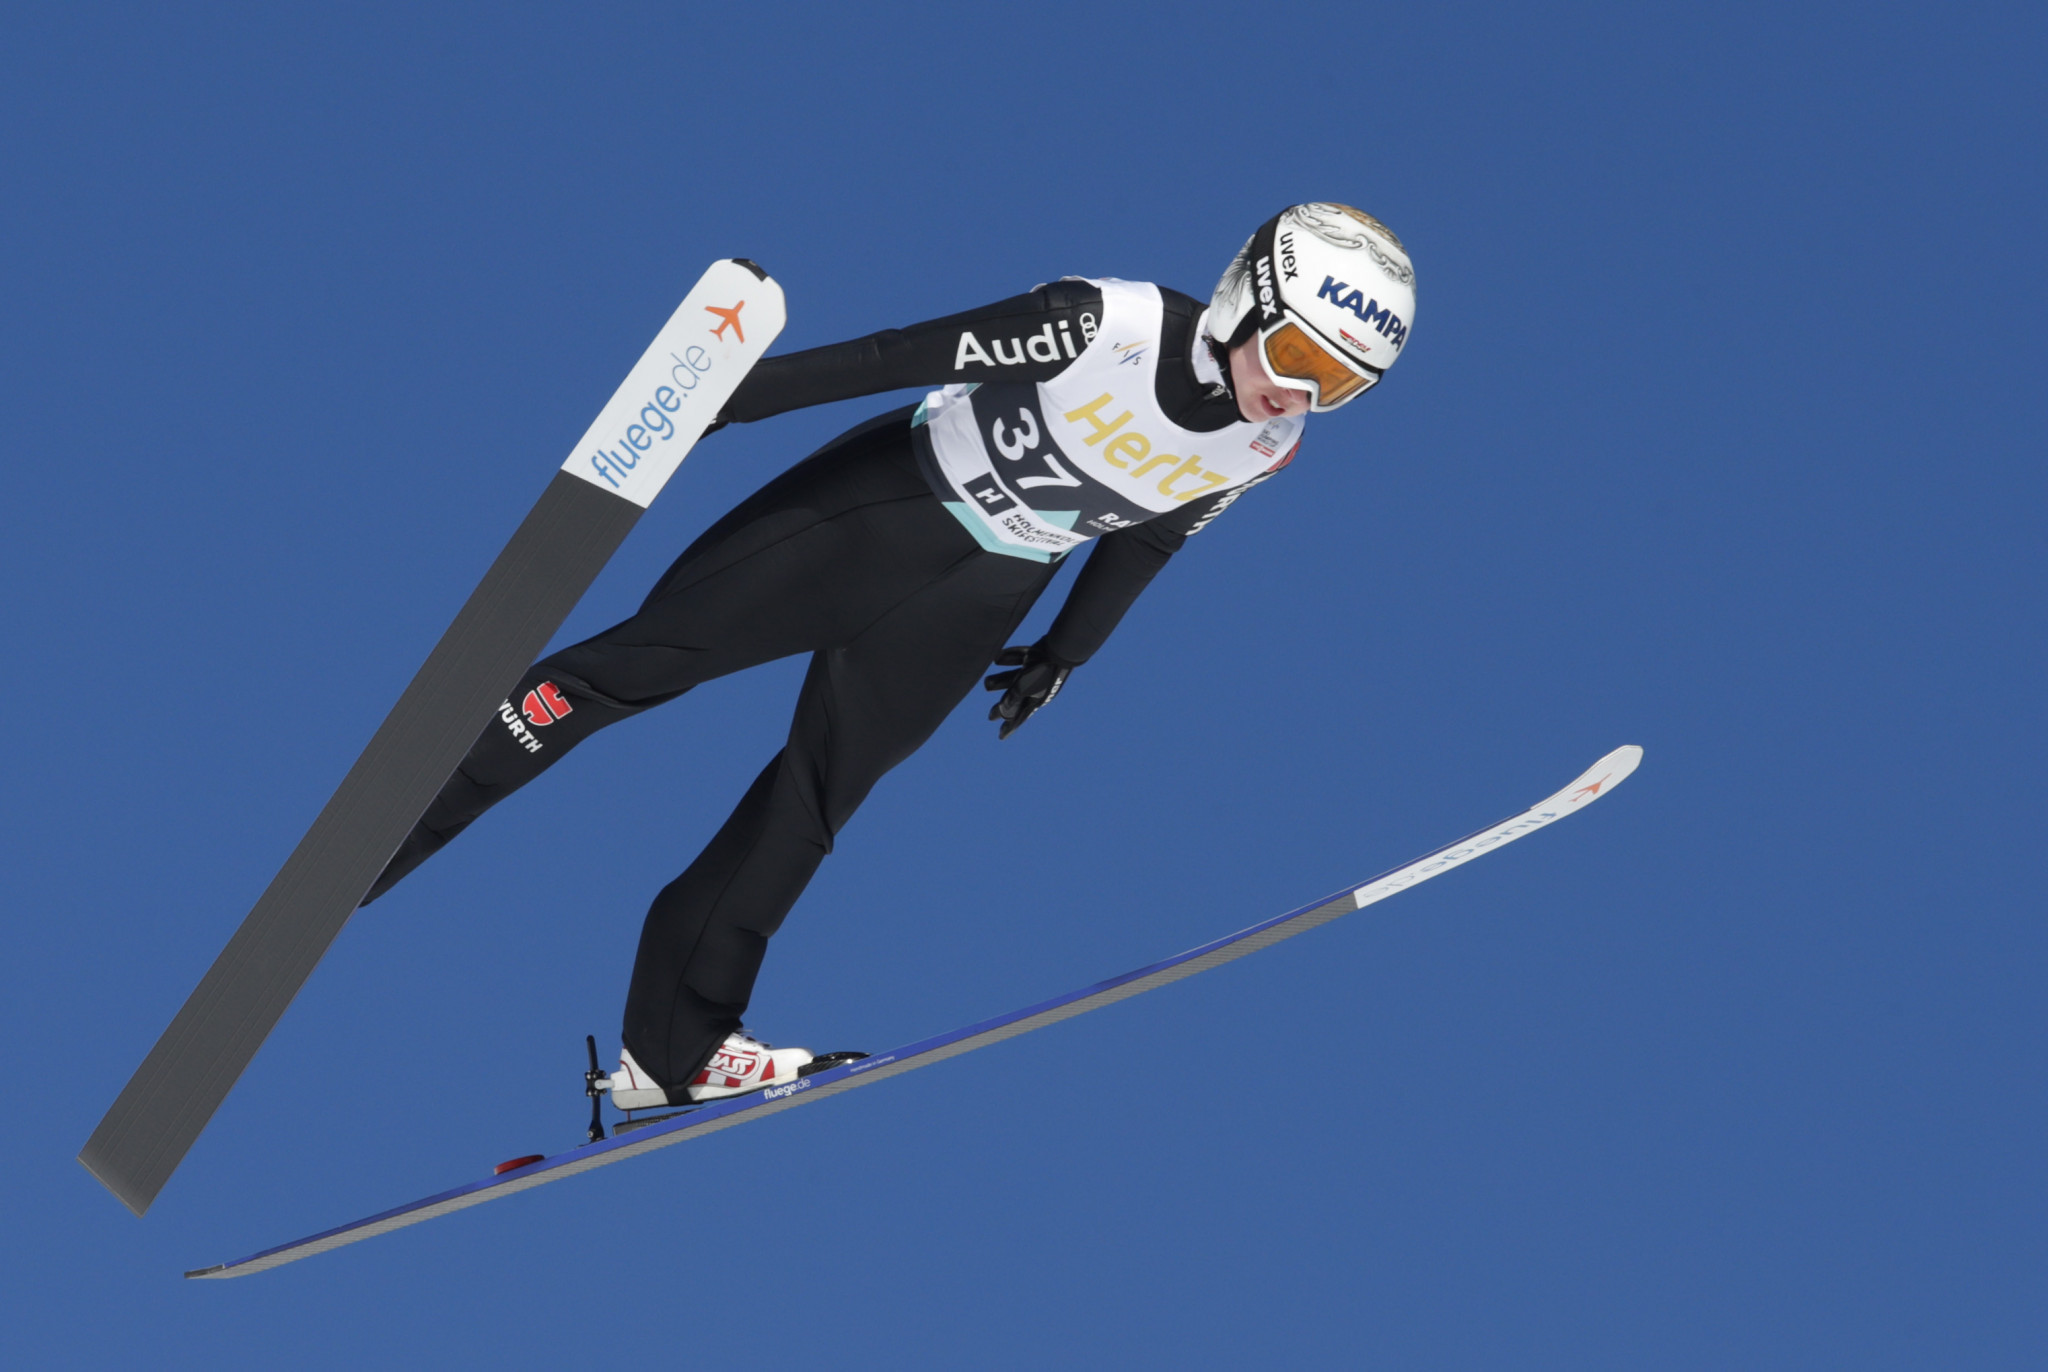 Germany's Juliane Seyfarth triumphed in the FIS Ski Jumping World Cup event in Nizhny Tagil ©Getty Images